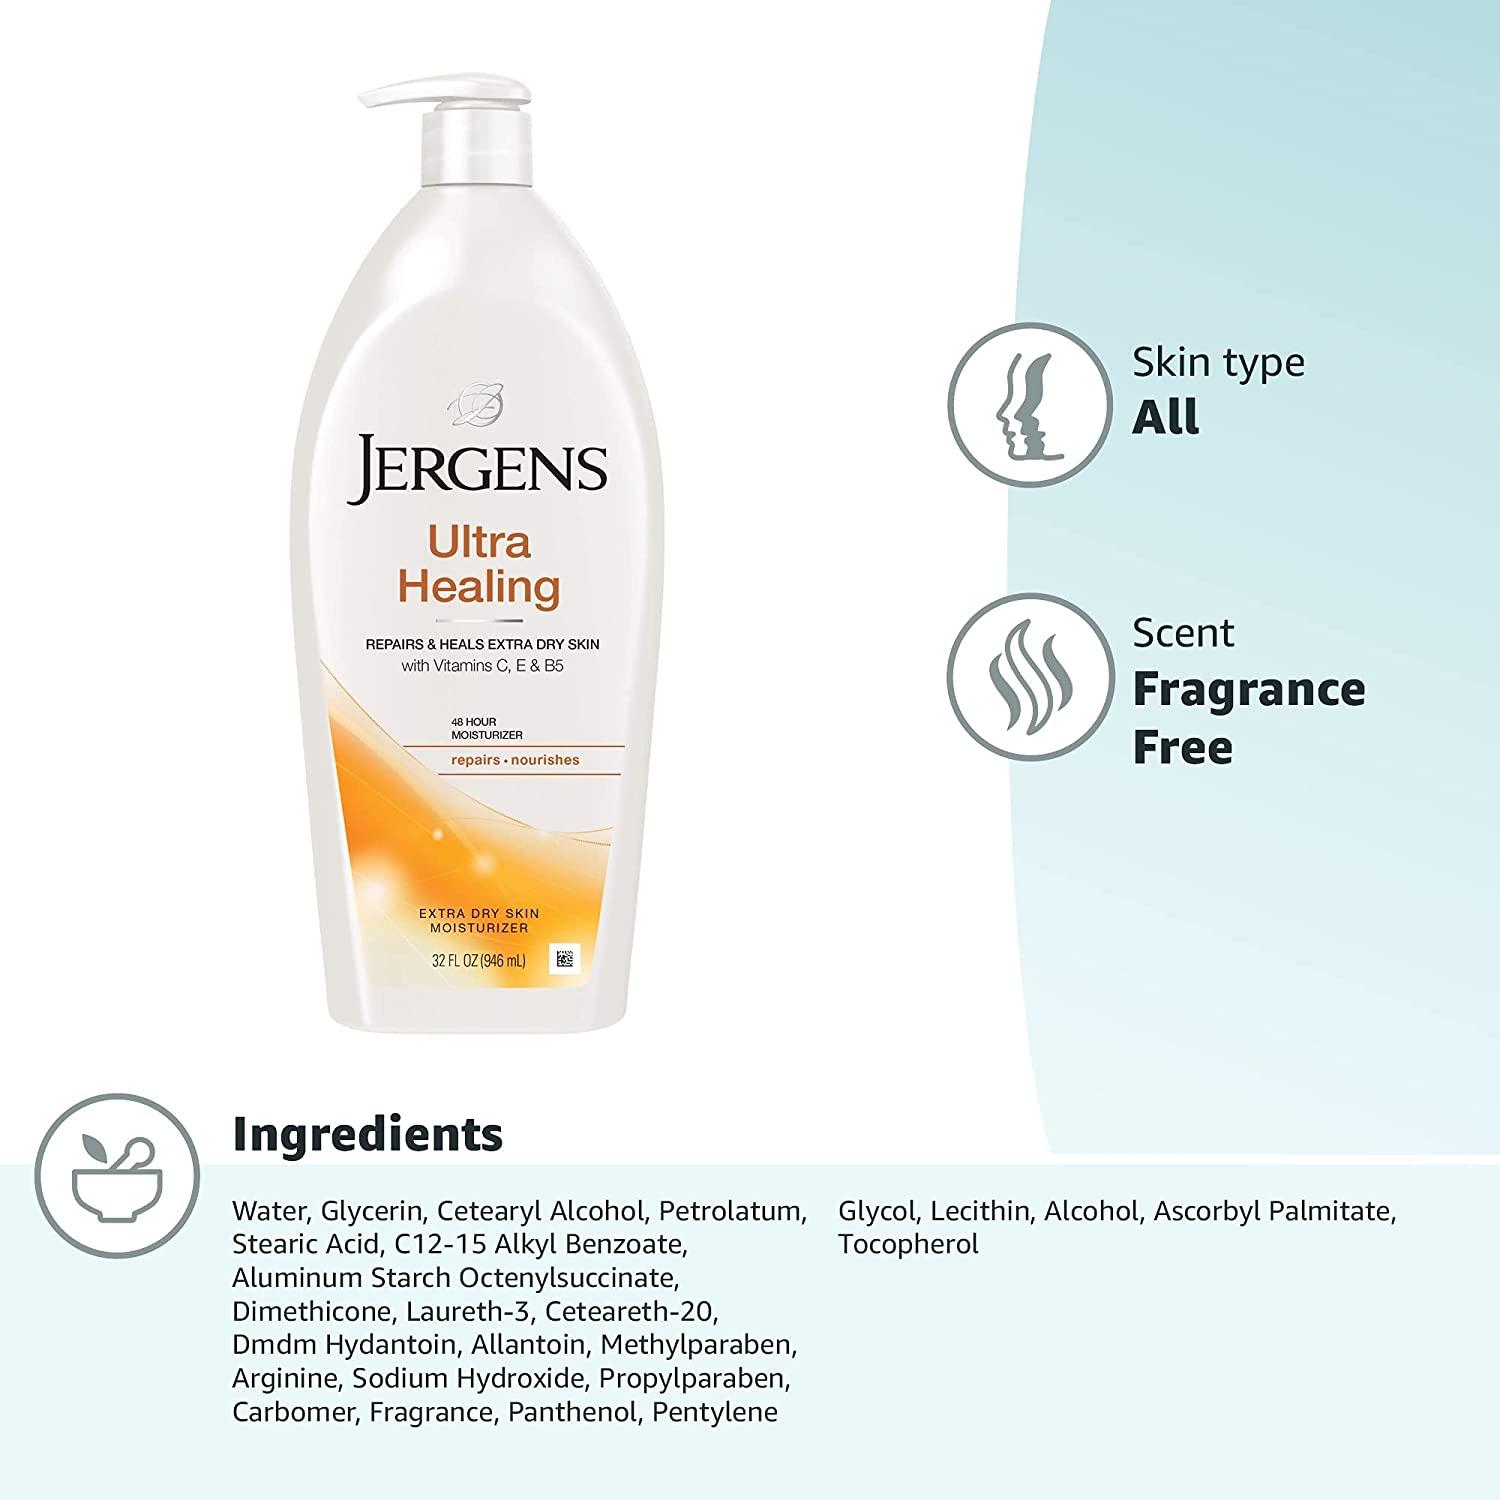 Uforglemmelig morfin Optimistisk Jergens Ultra Healing Dry Skin Moisturizer, Body and Hand Lotion for Dry  Skin, for Quick Absorption into Extra Dry Skin, with HYDRALUCENCE blend,  Vitamins C, E, and B5, 32 Ounce 32 Fl